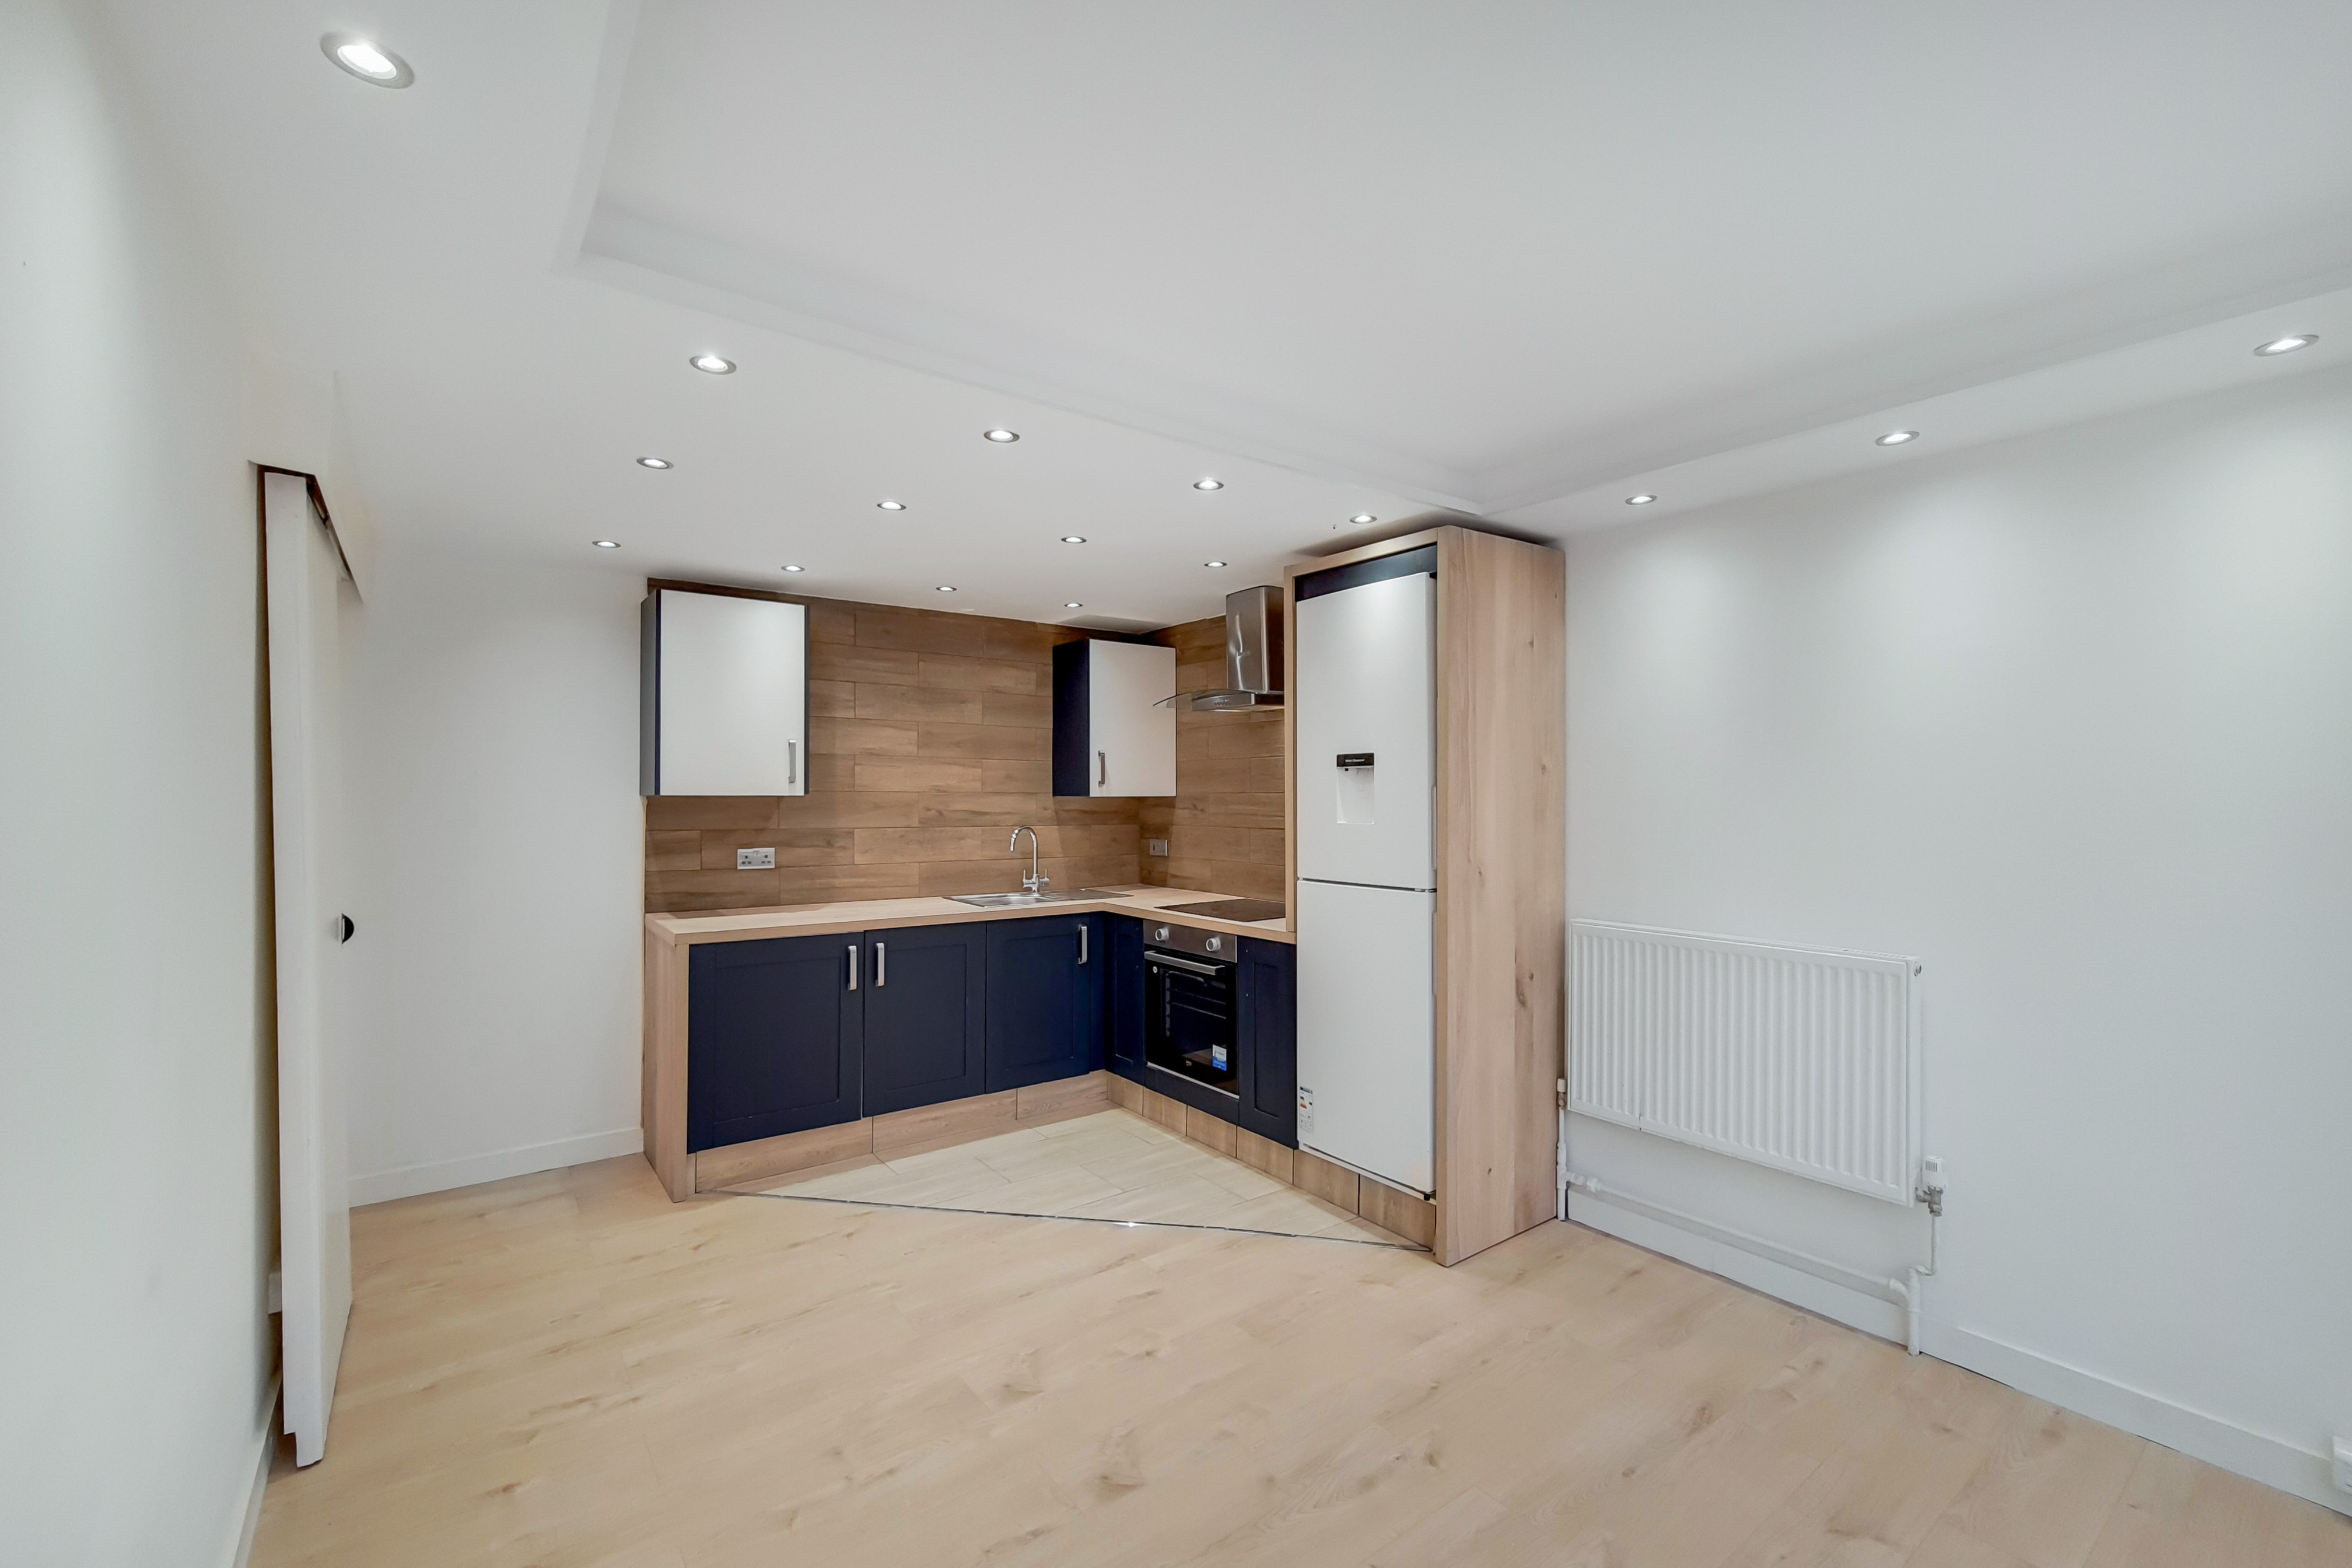 2 bed Apartment/Flat/Studio for rent in Camberwell. From PropertyLoop